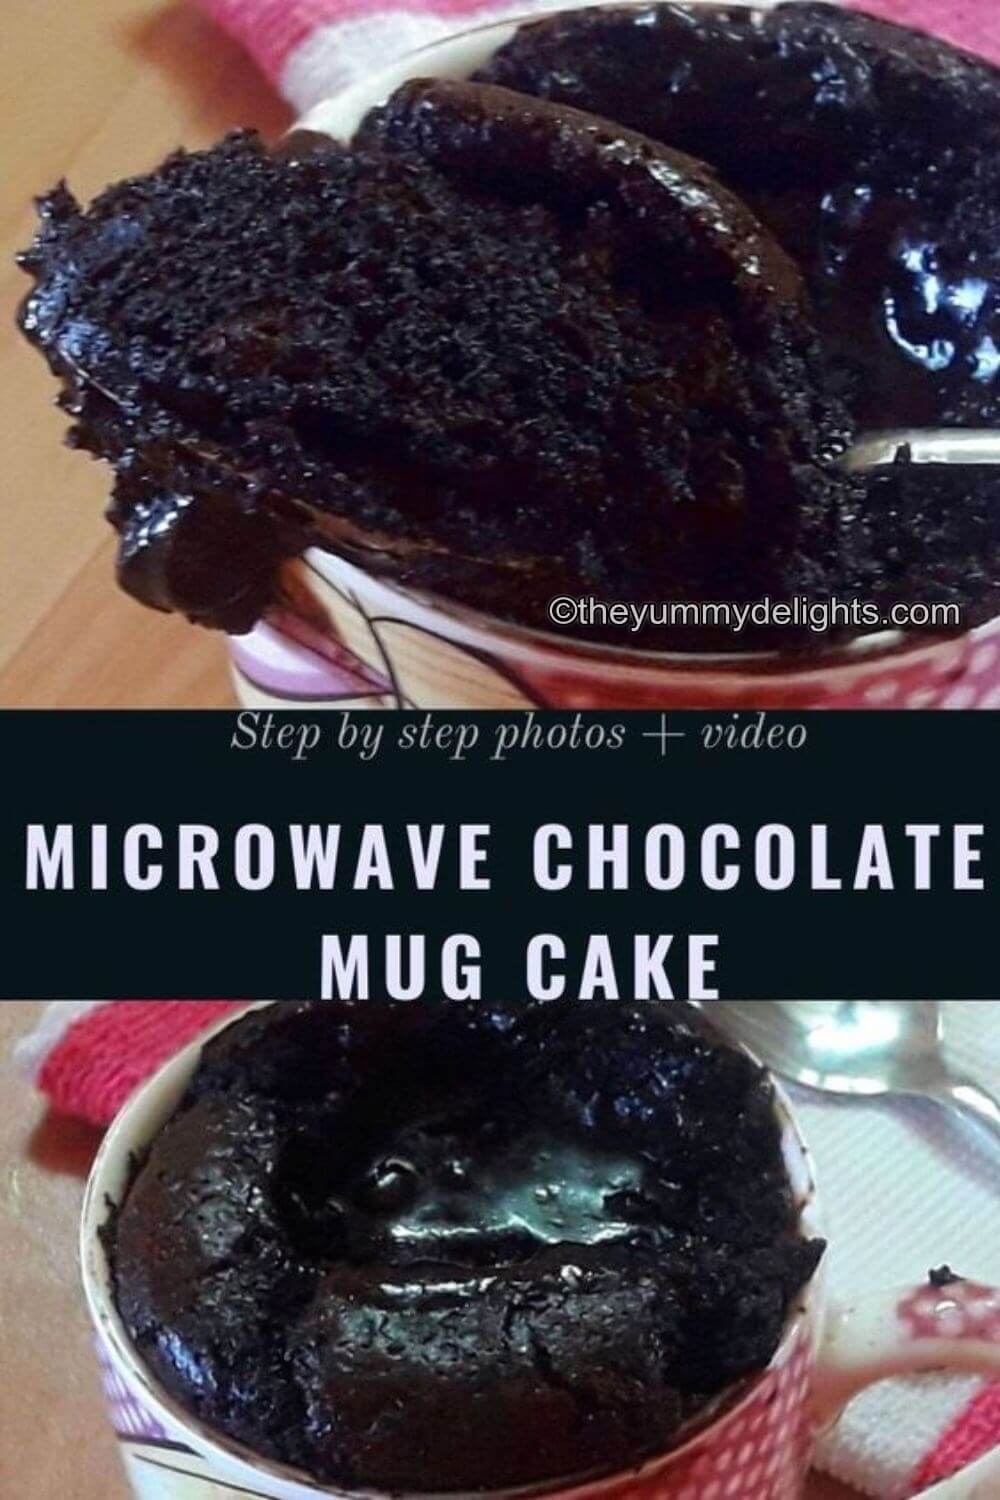 close-up of chocolate mug cake. It shows the top shot, texture of cake, and a molten chocolaty center.